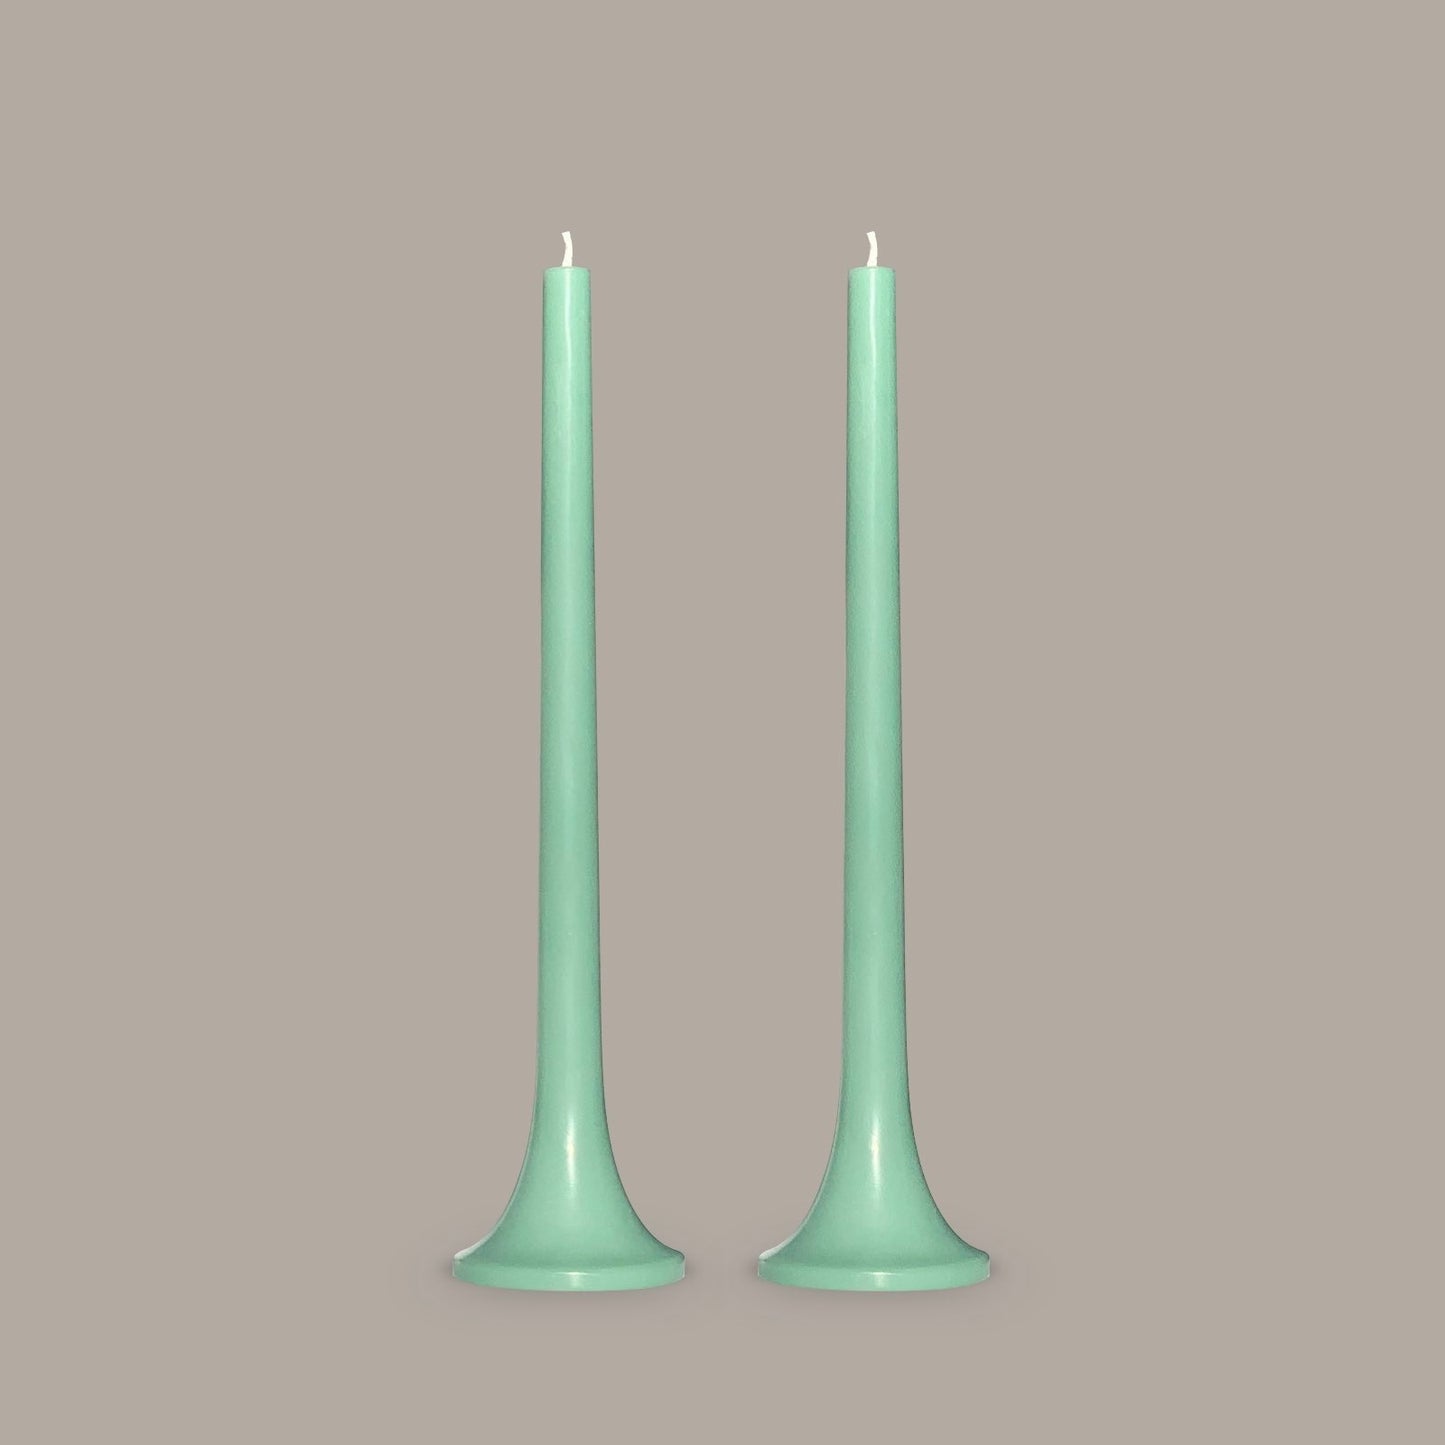 Pale green taper candles